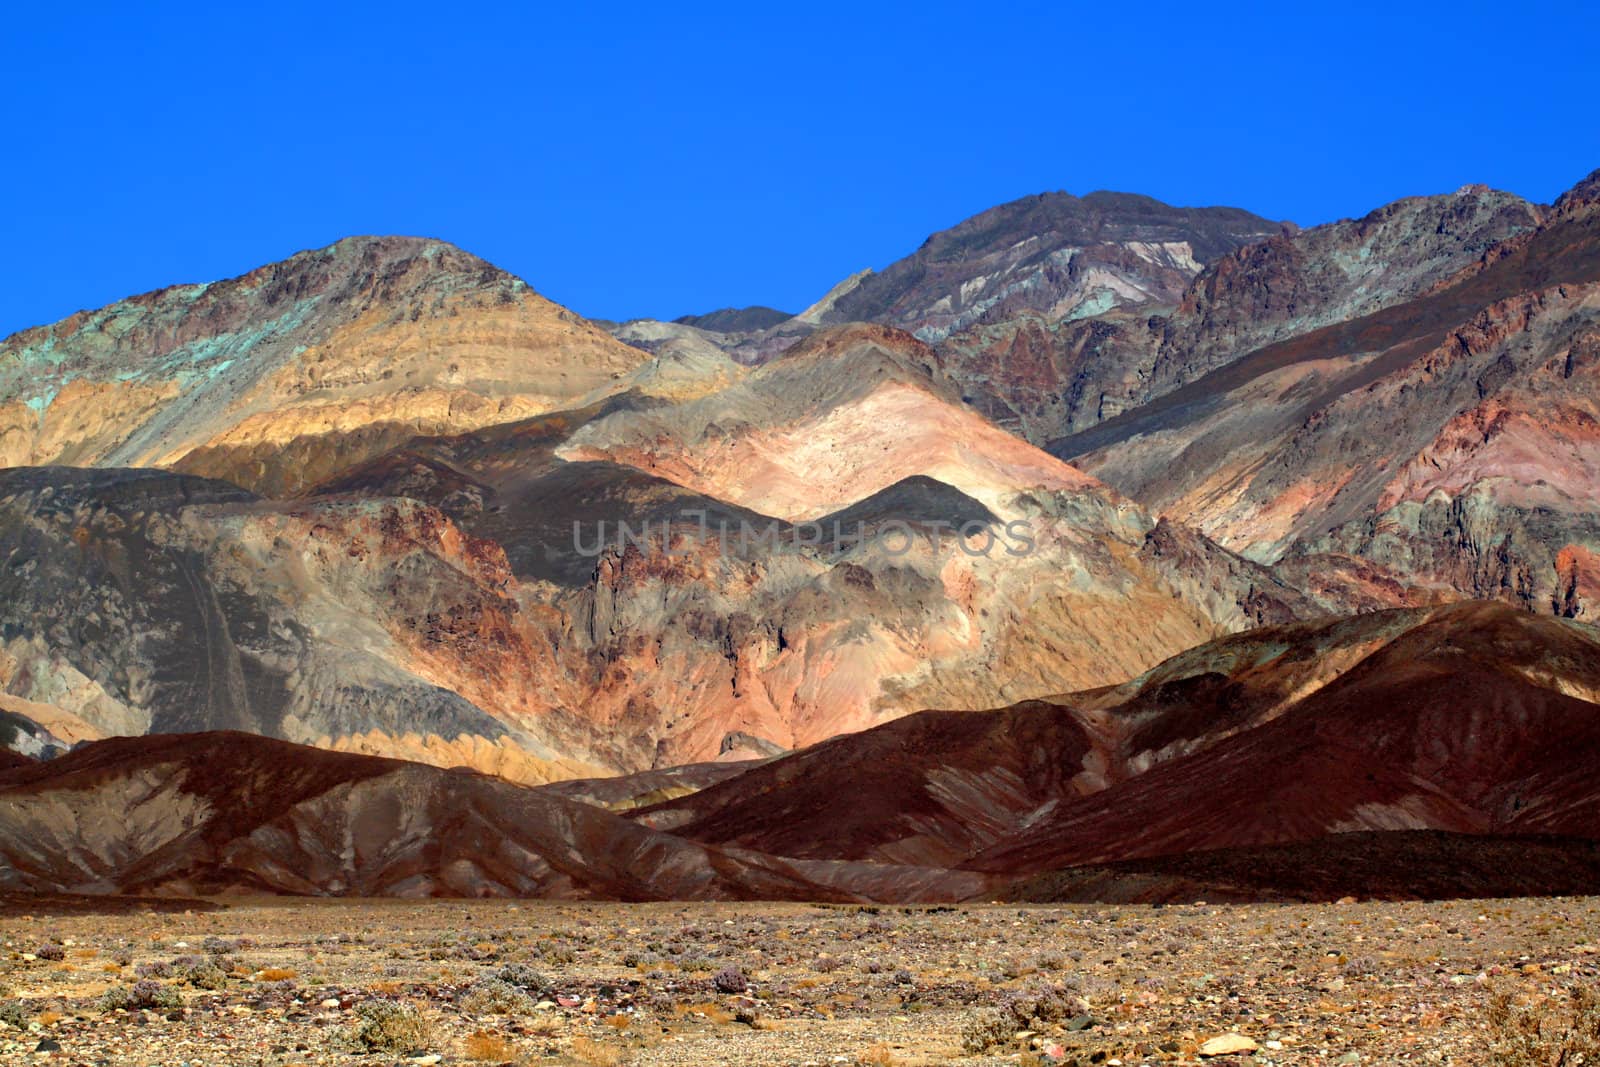 Varied hues of rock on the mountains of Death Valley National Park.